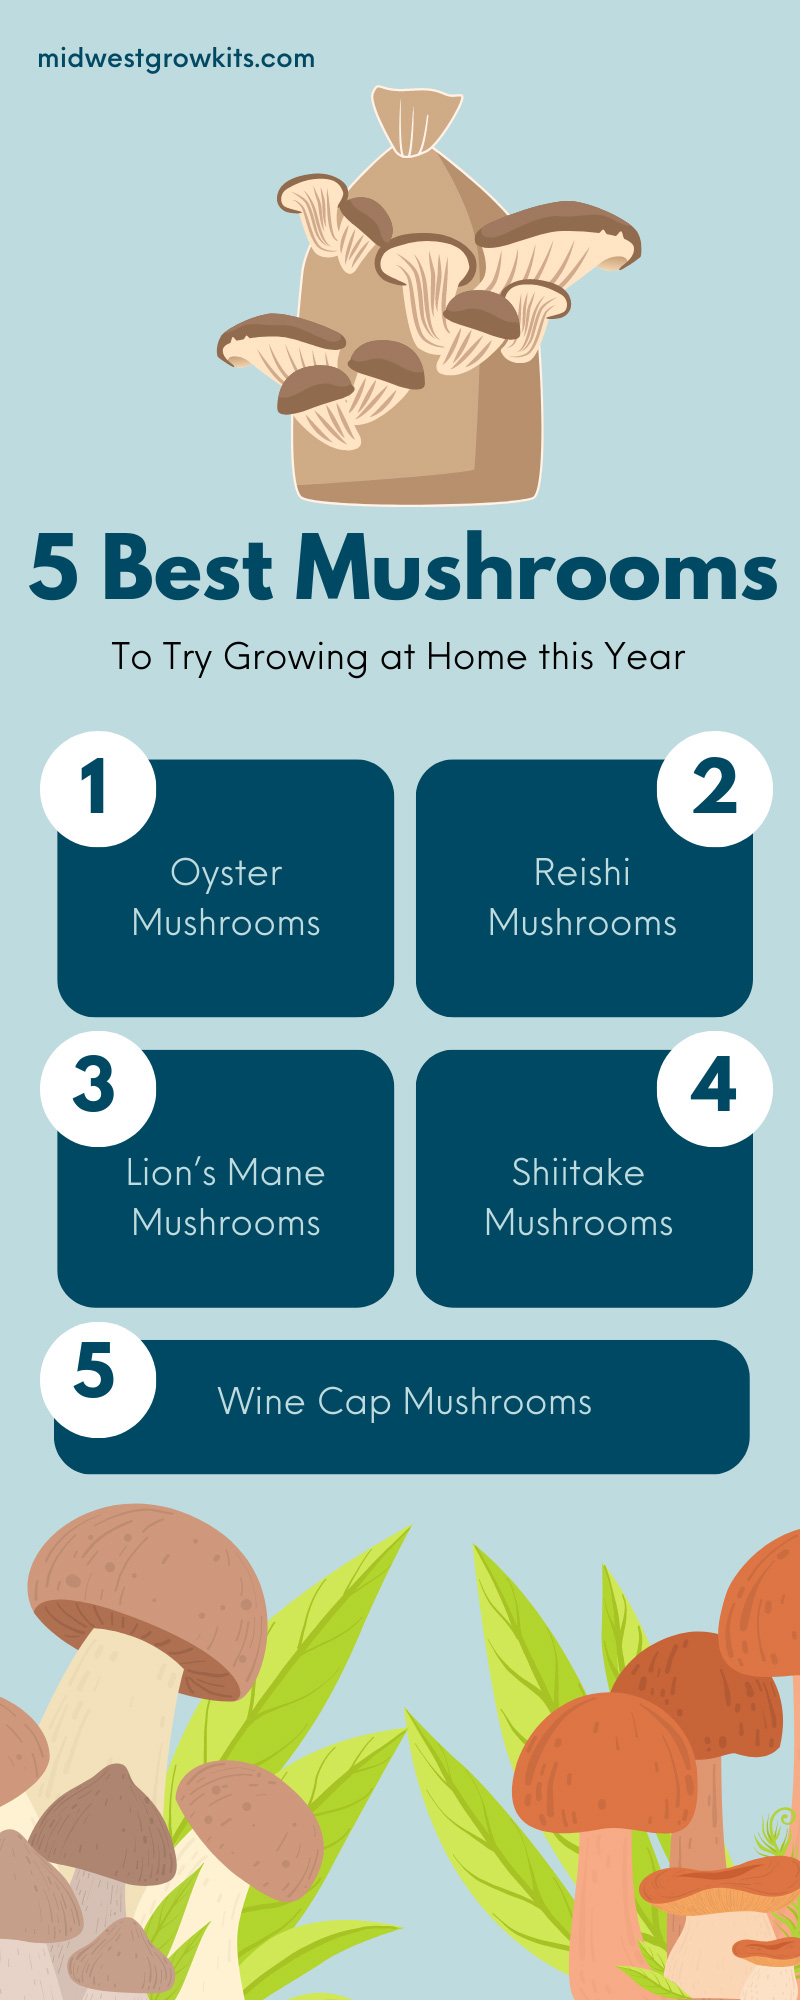 5 Best Mushrooms To Try Growing at Home this Year